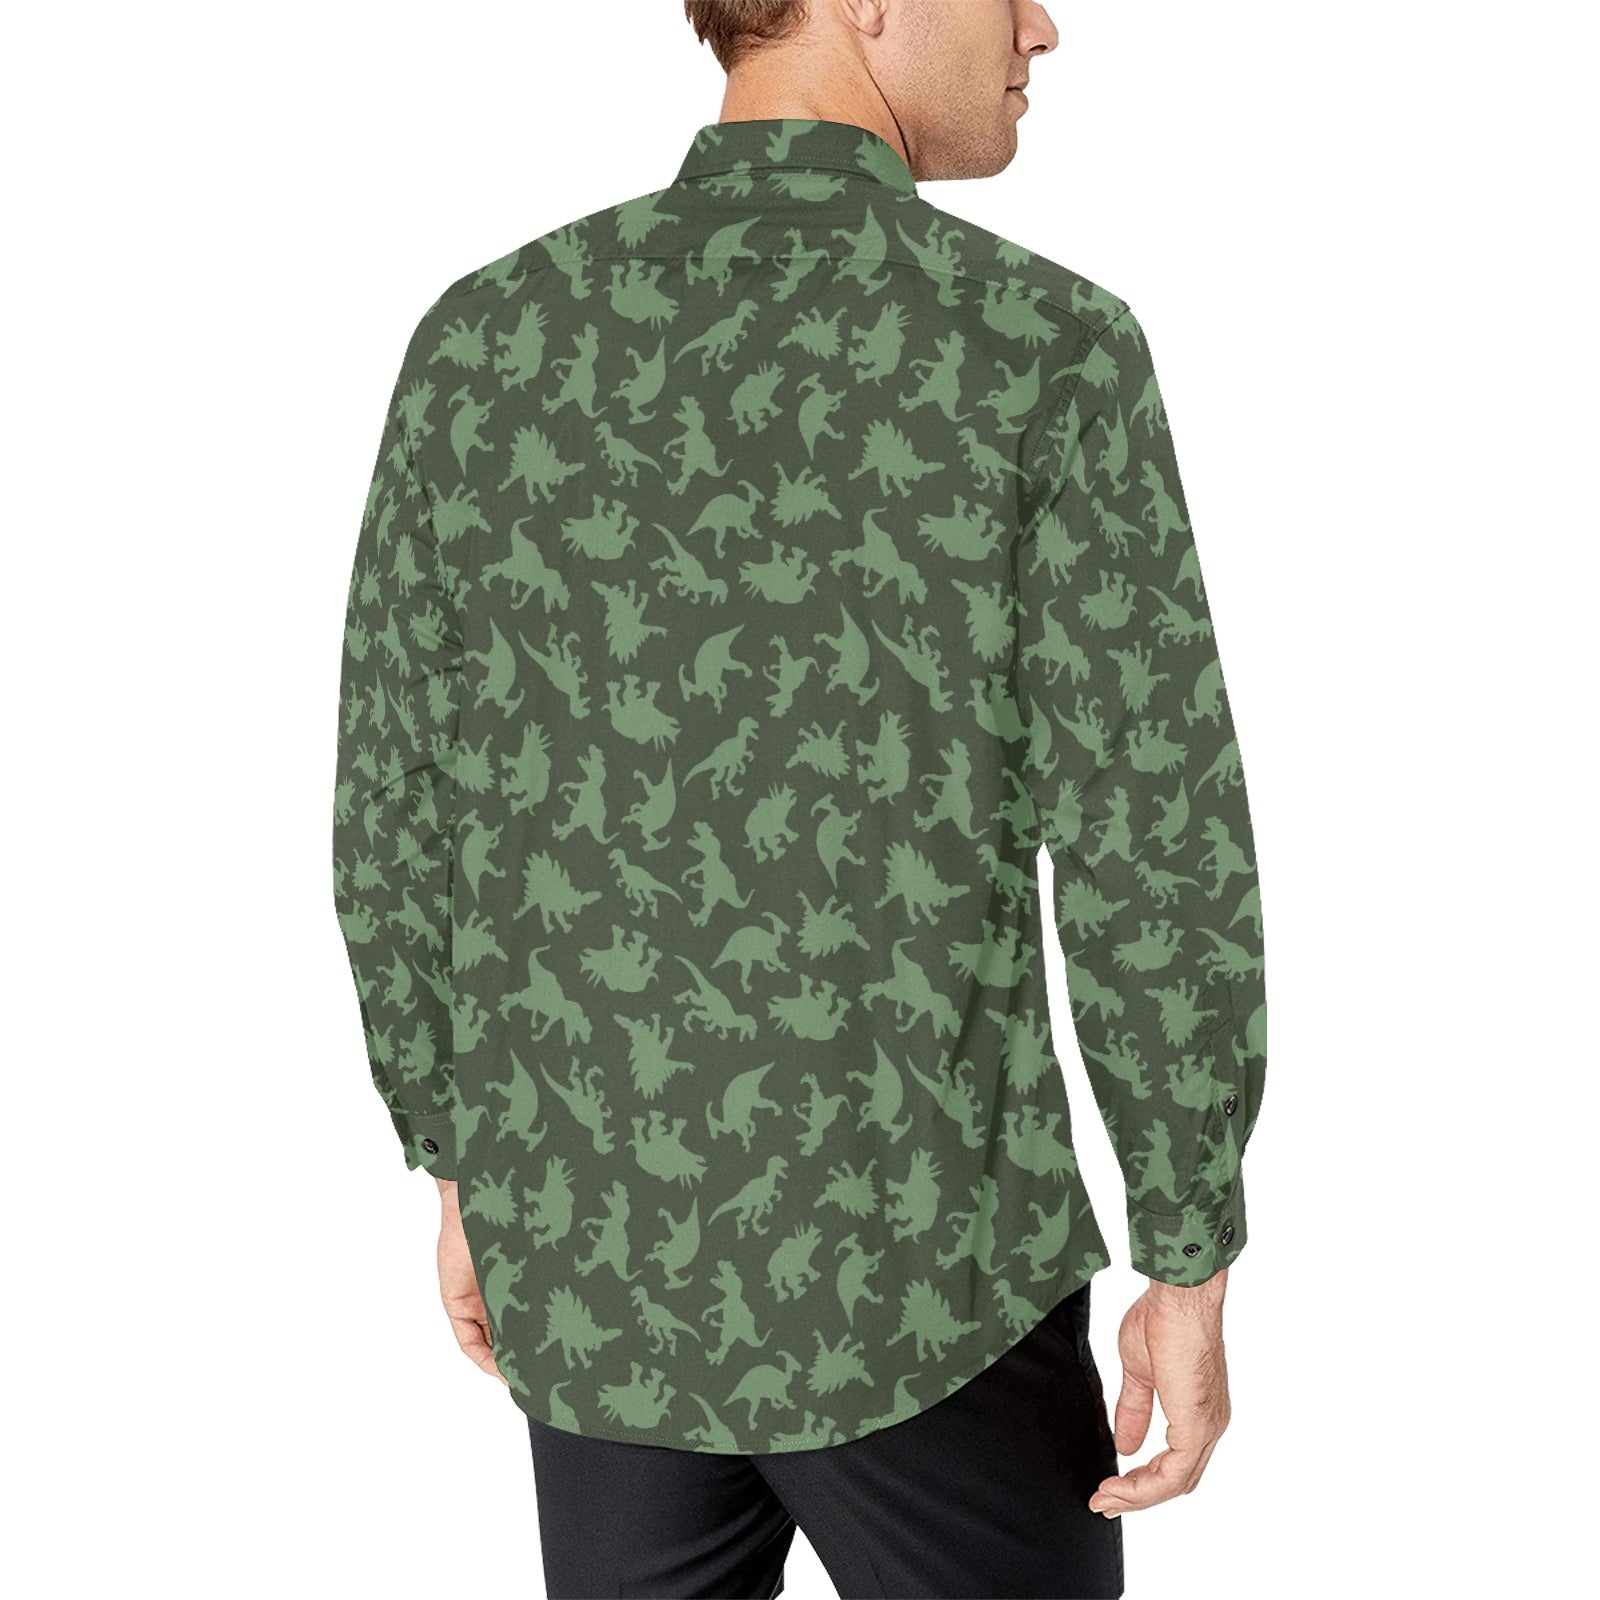 Dinosaurs Long Sleeve Men Button Up Shirt, Dino Green Print Buttoned Collar Casual Shirt with Chest Pocket Starcove Fashion